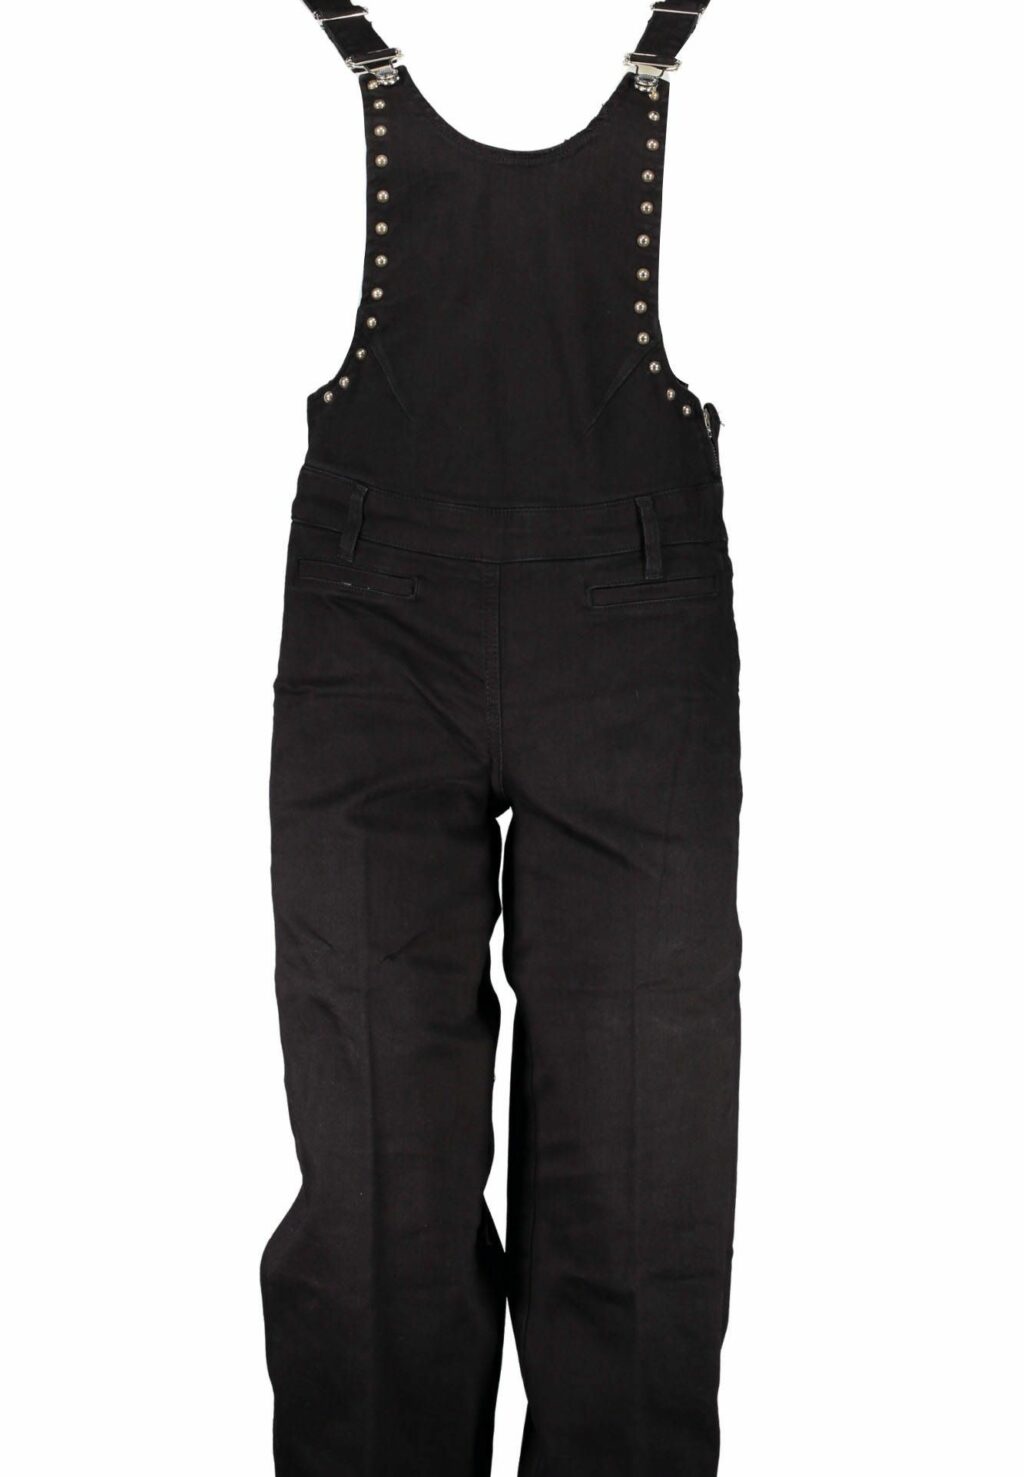 GUESS JEANS WOMEN'S BLACK DUNGAREES TROUSERS W73D55D2N81_NERO_BSUN